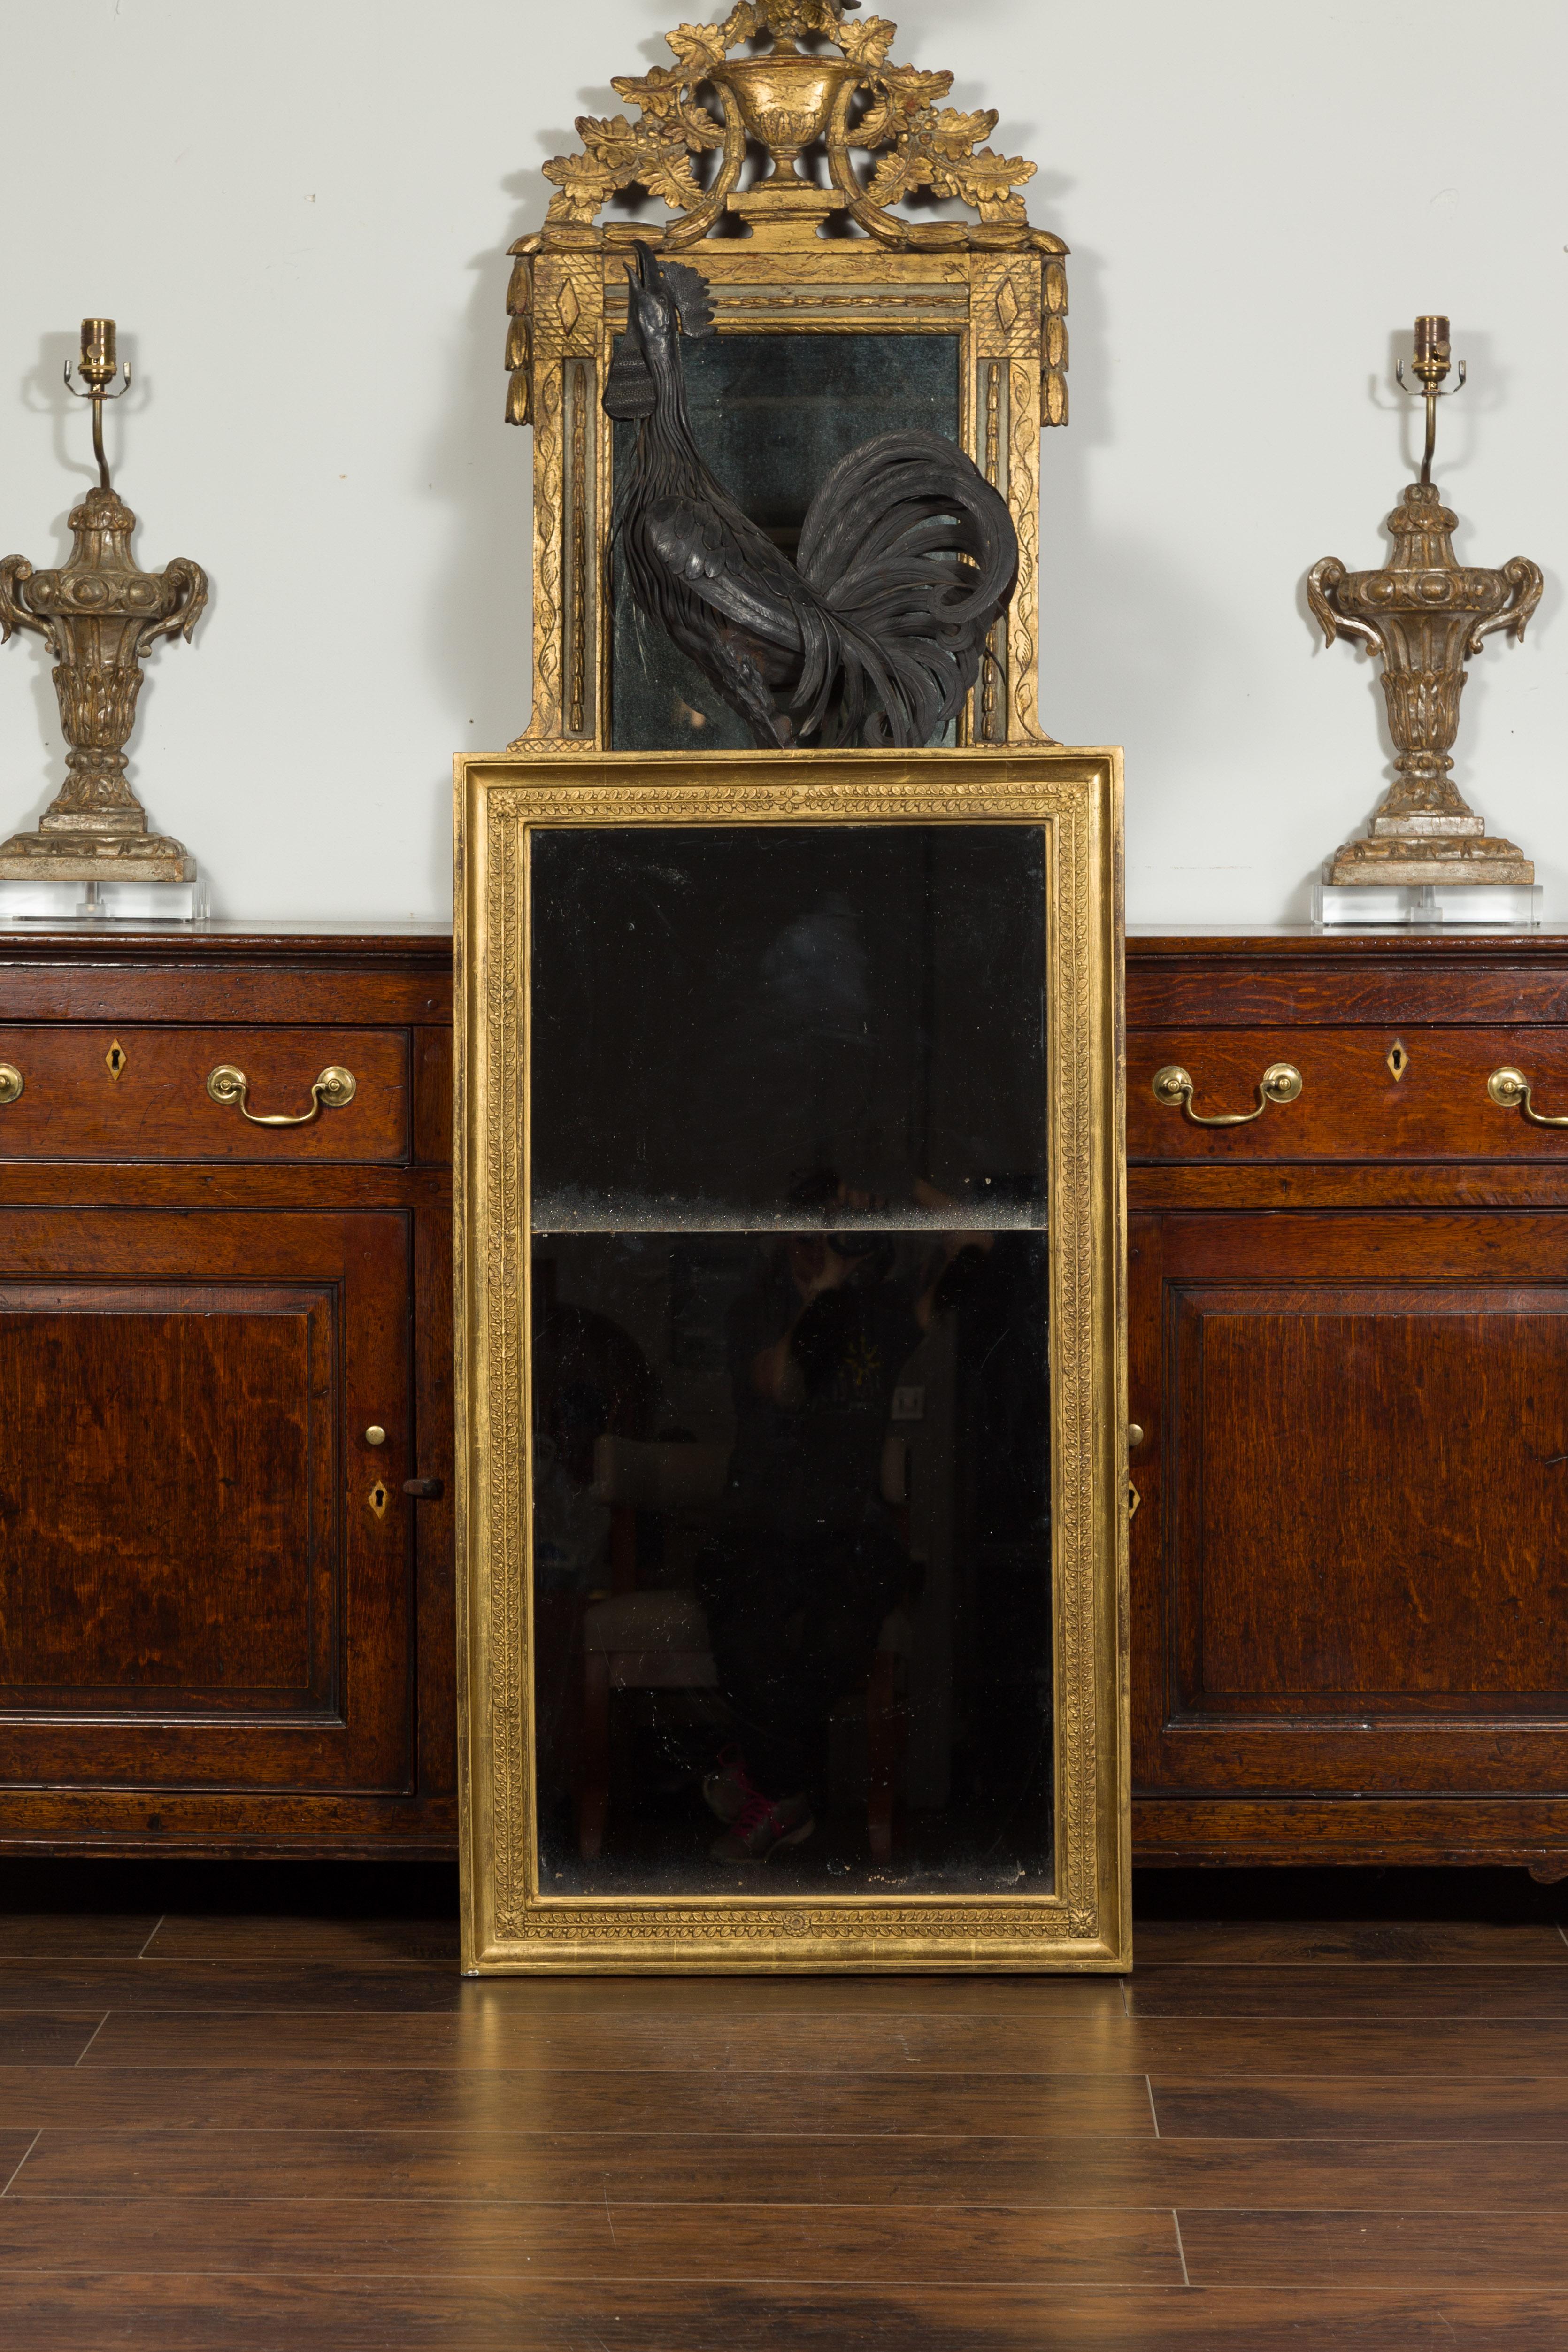 20th Century French Turn of the Century Giltwood Split Mirror with Foliage and Rosettes